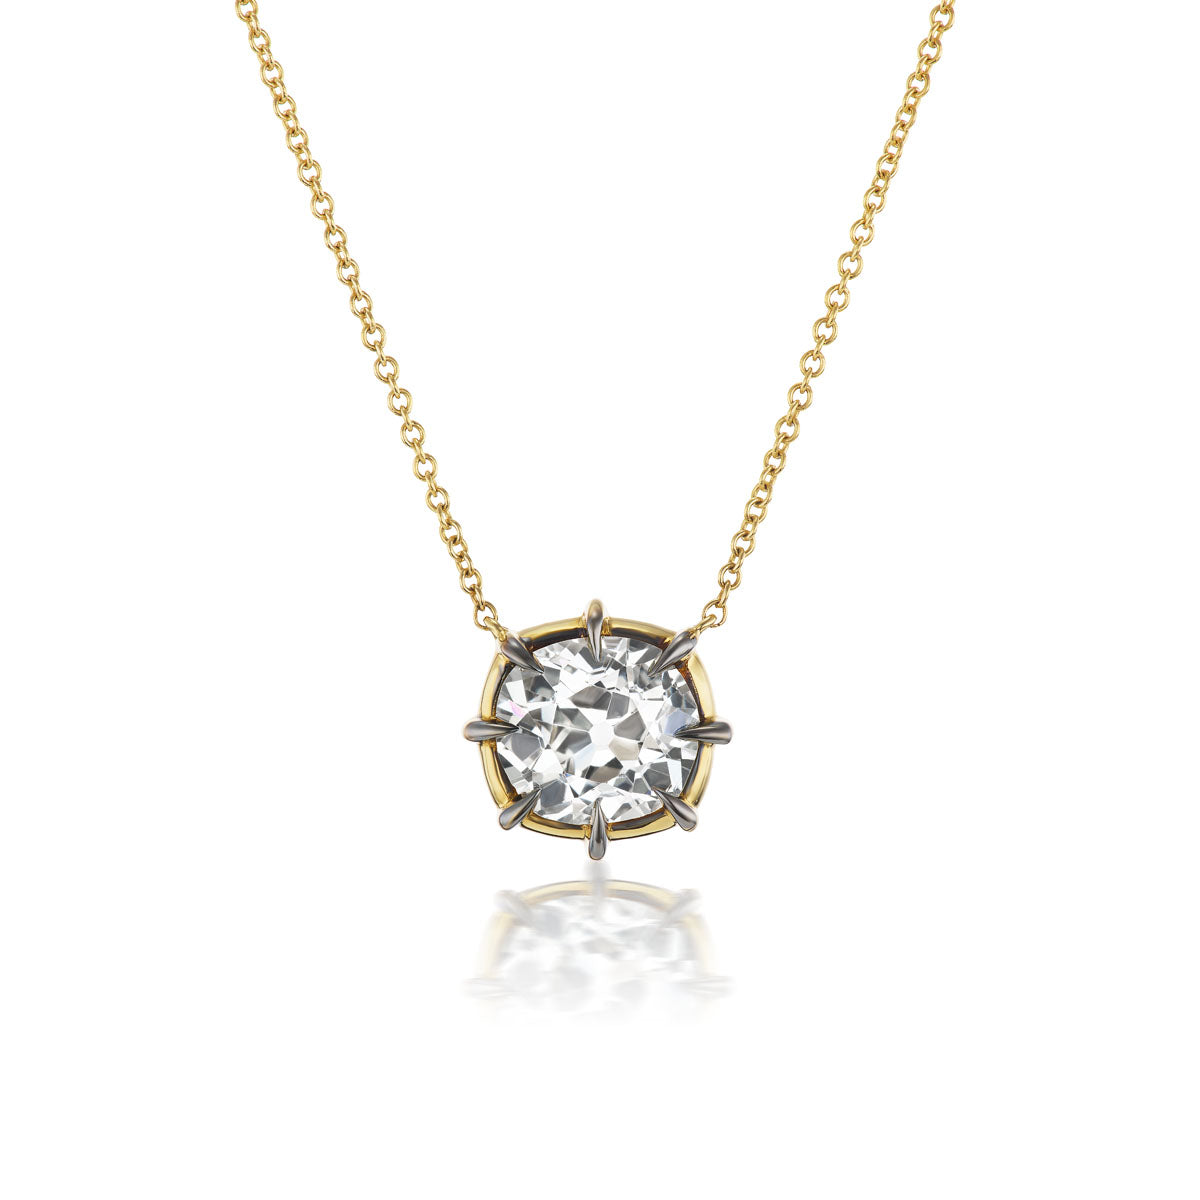 Cushion Cut Diamond Collet Pendant in Yellow and Blackened Gold